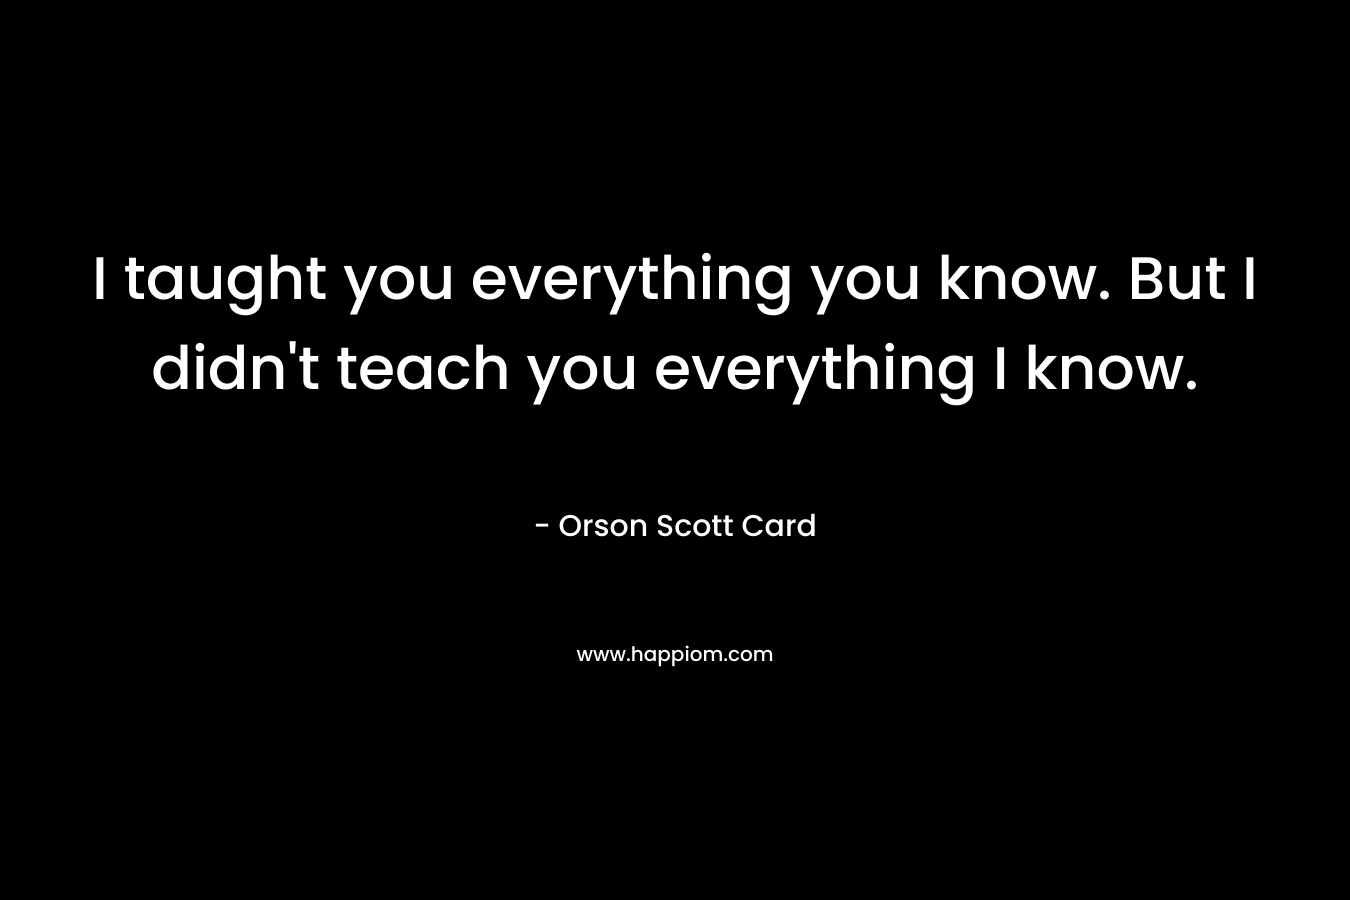 I taught you everything you know. But I didn’t teach you everything I know. – Orson Scott Card